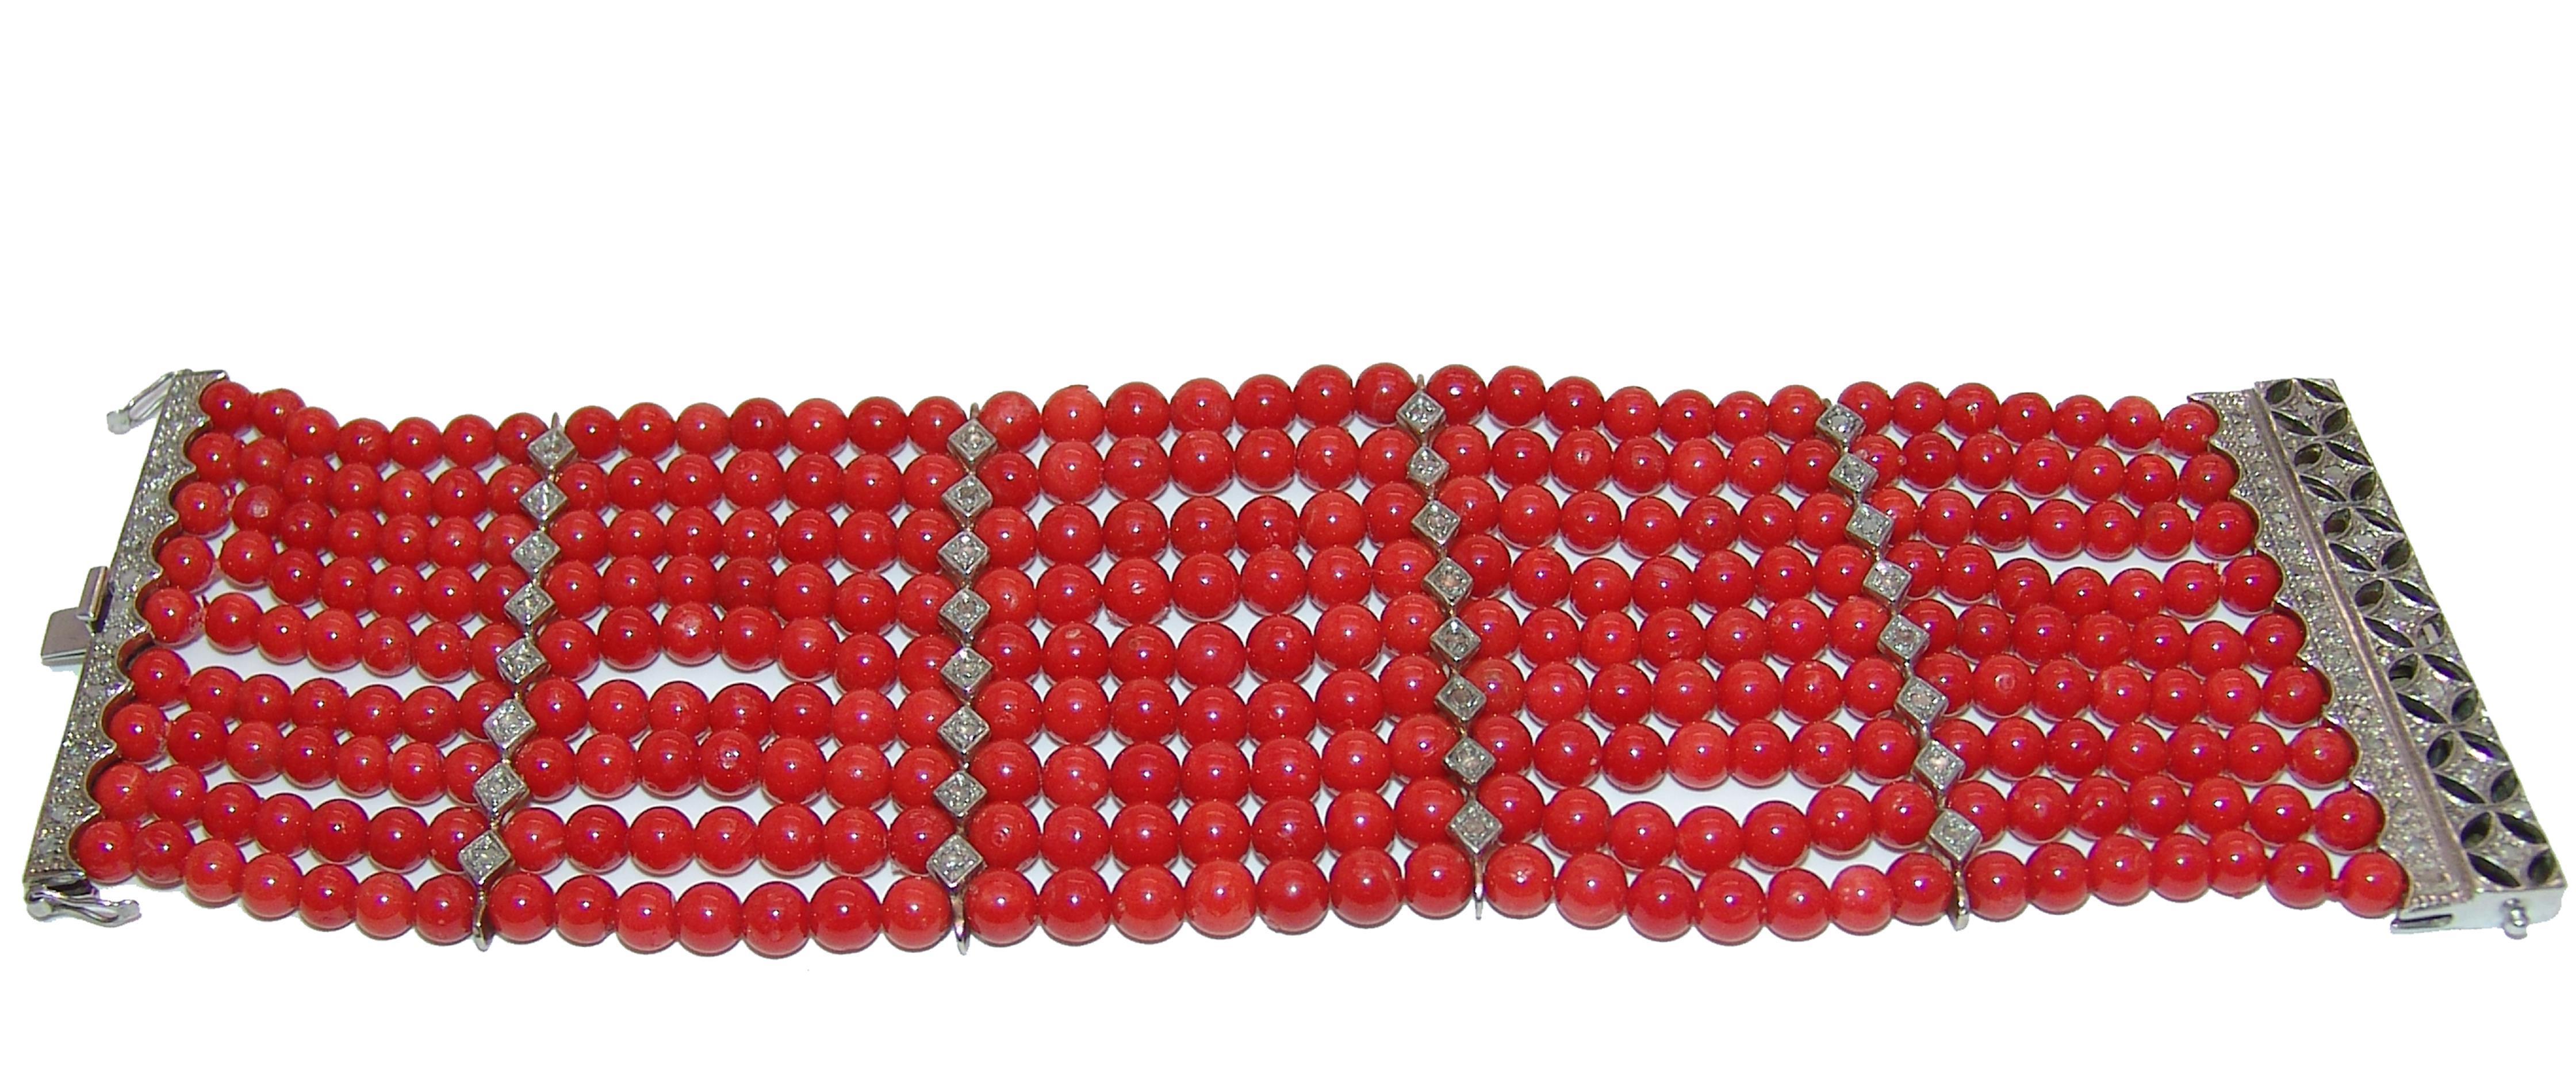 	9 -strand Mediterranean red coral bracelet with gold clasp and bars spacers,gold is 9kt.
 total weight is 113 gr .All made by hand in Italy.
